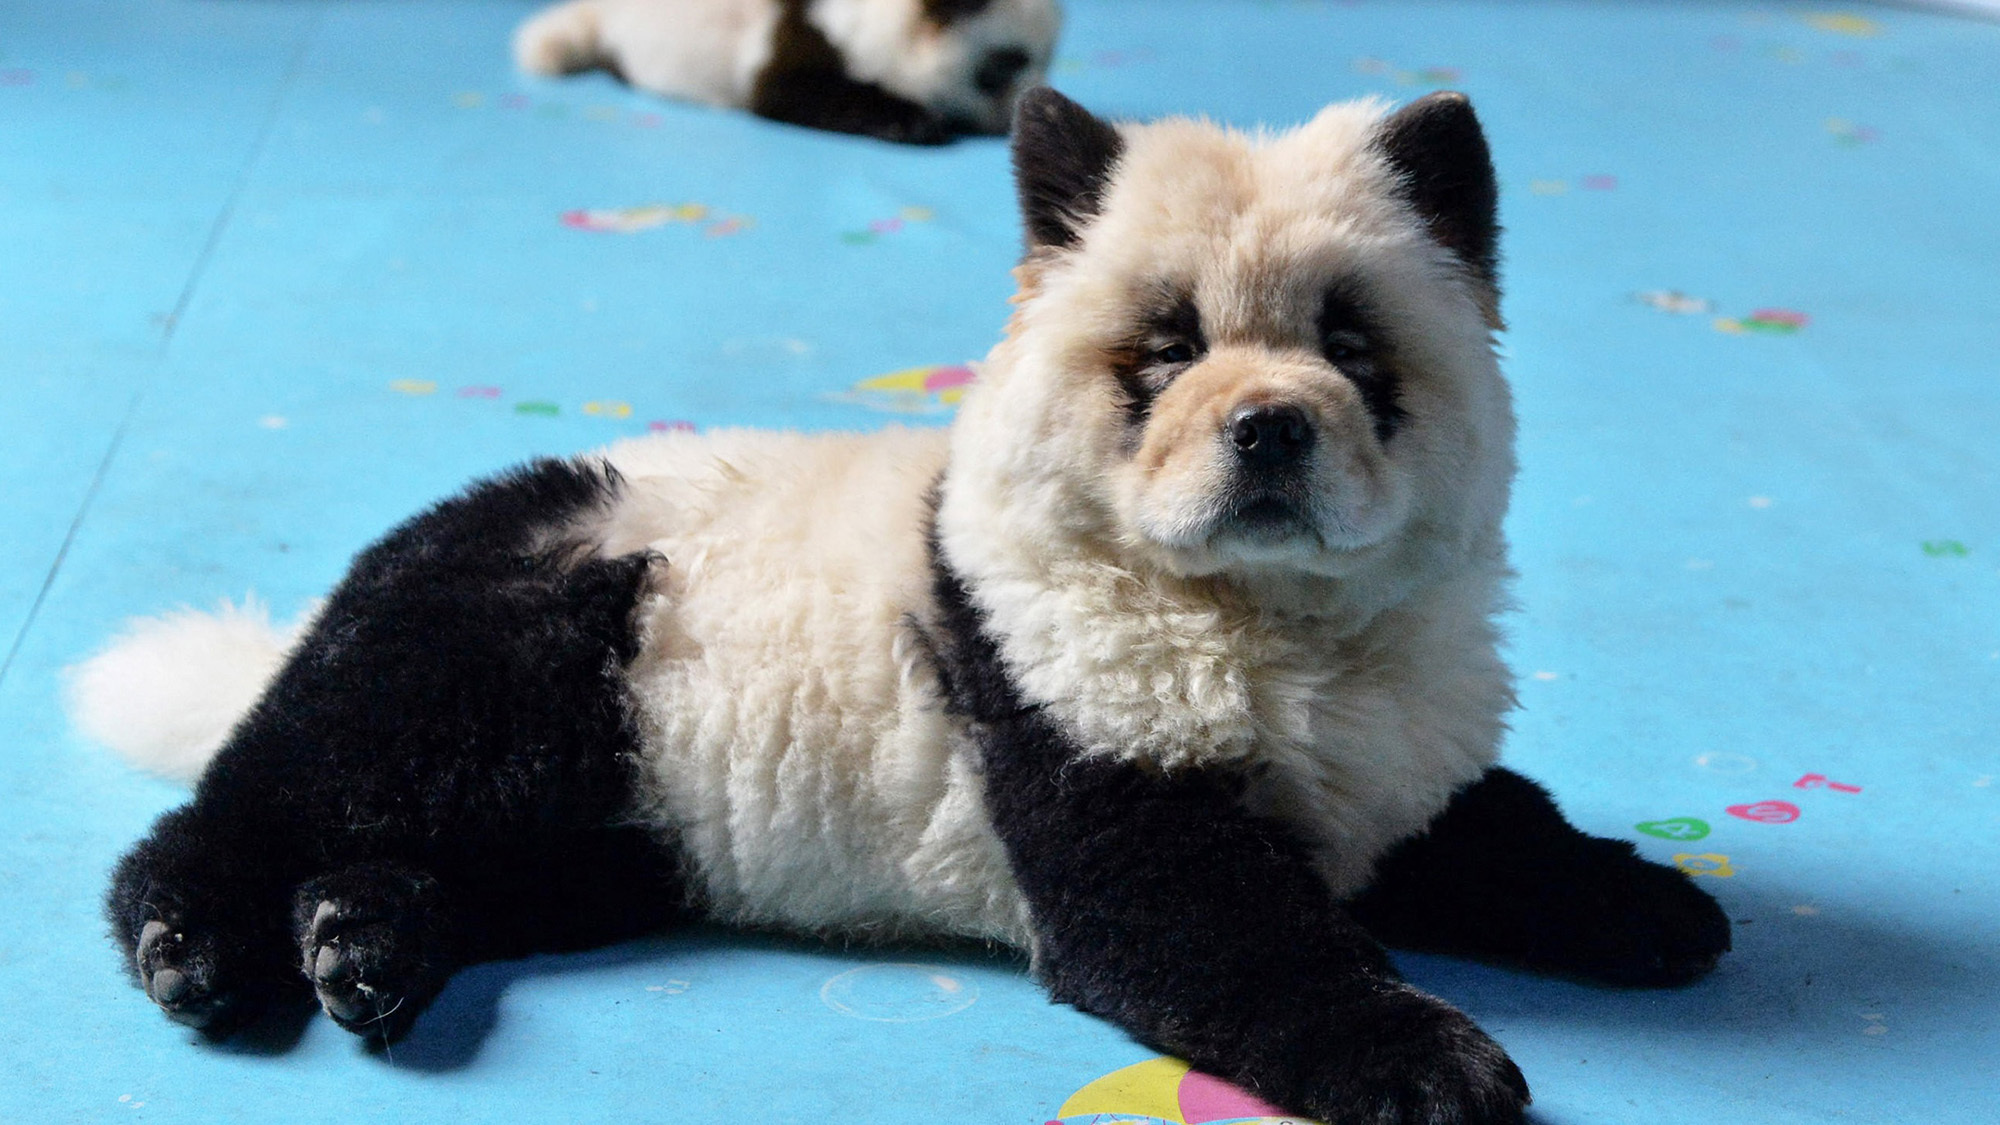 Chinese zoo dyes dogs to look like baby pandas